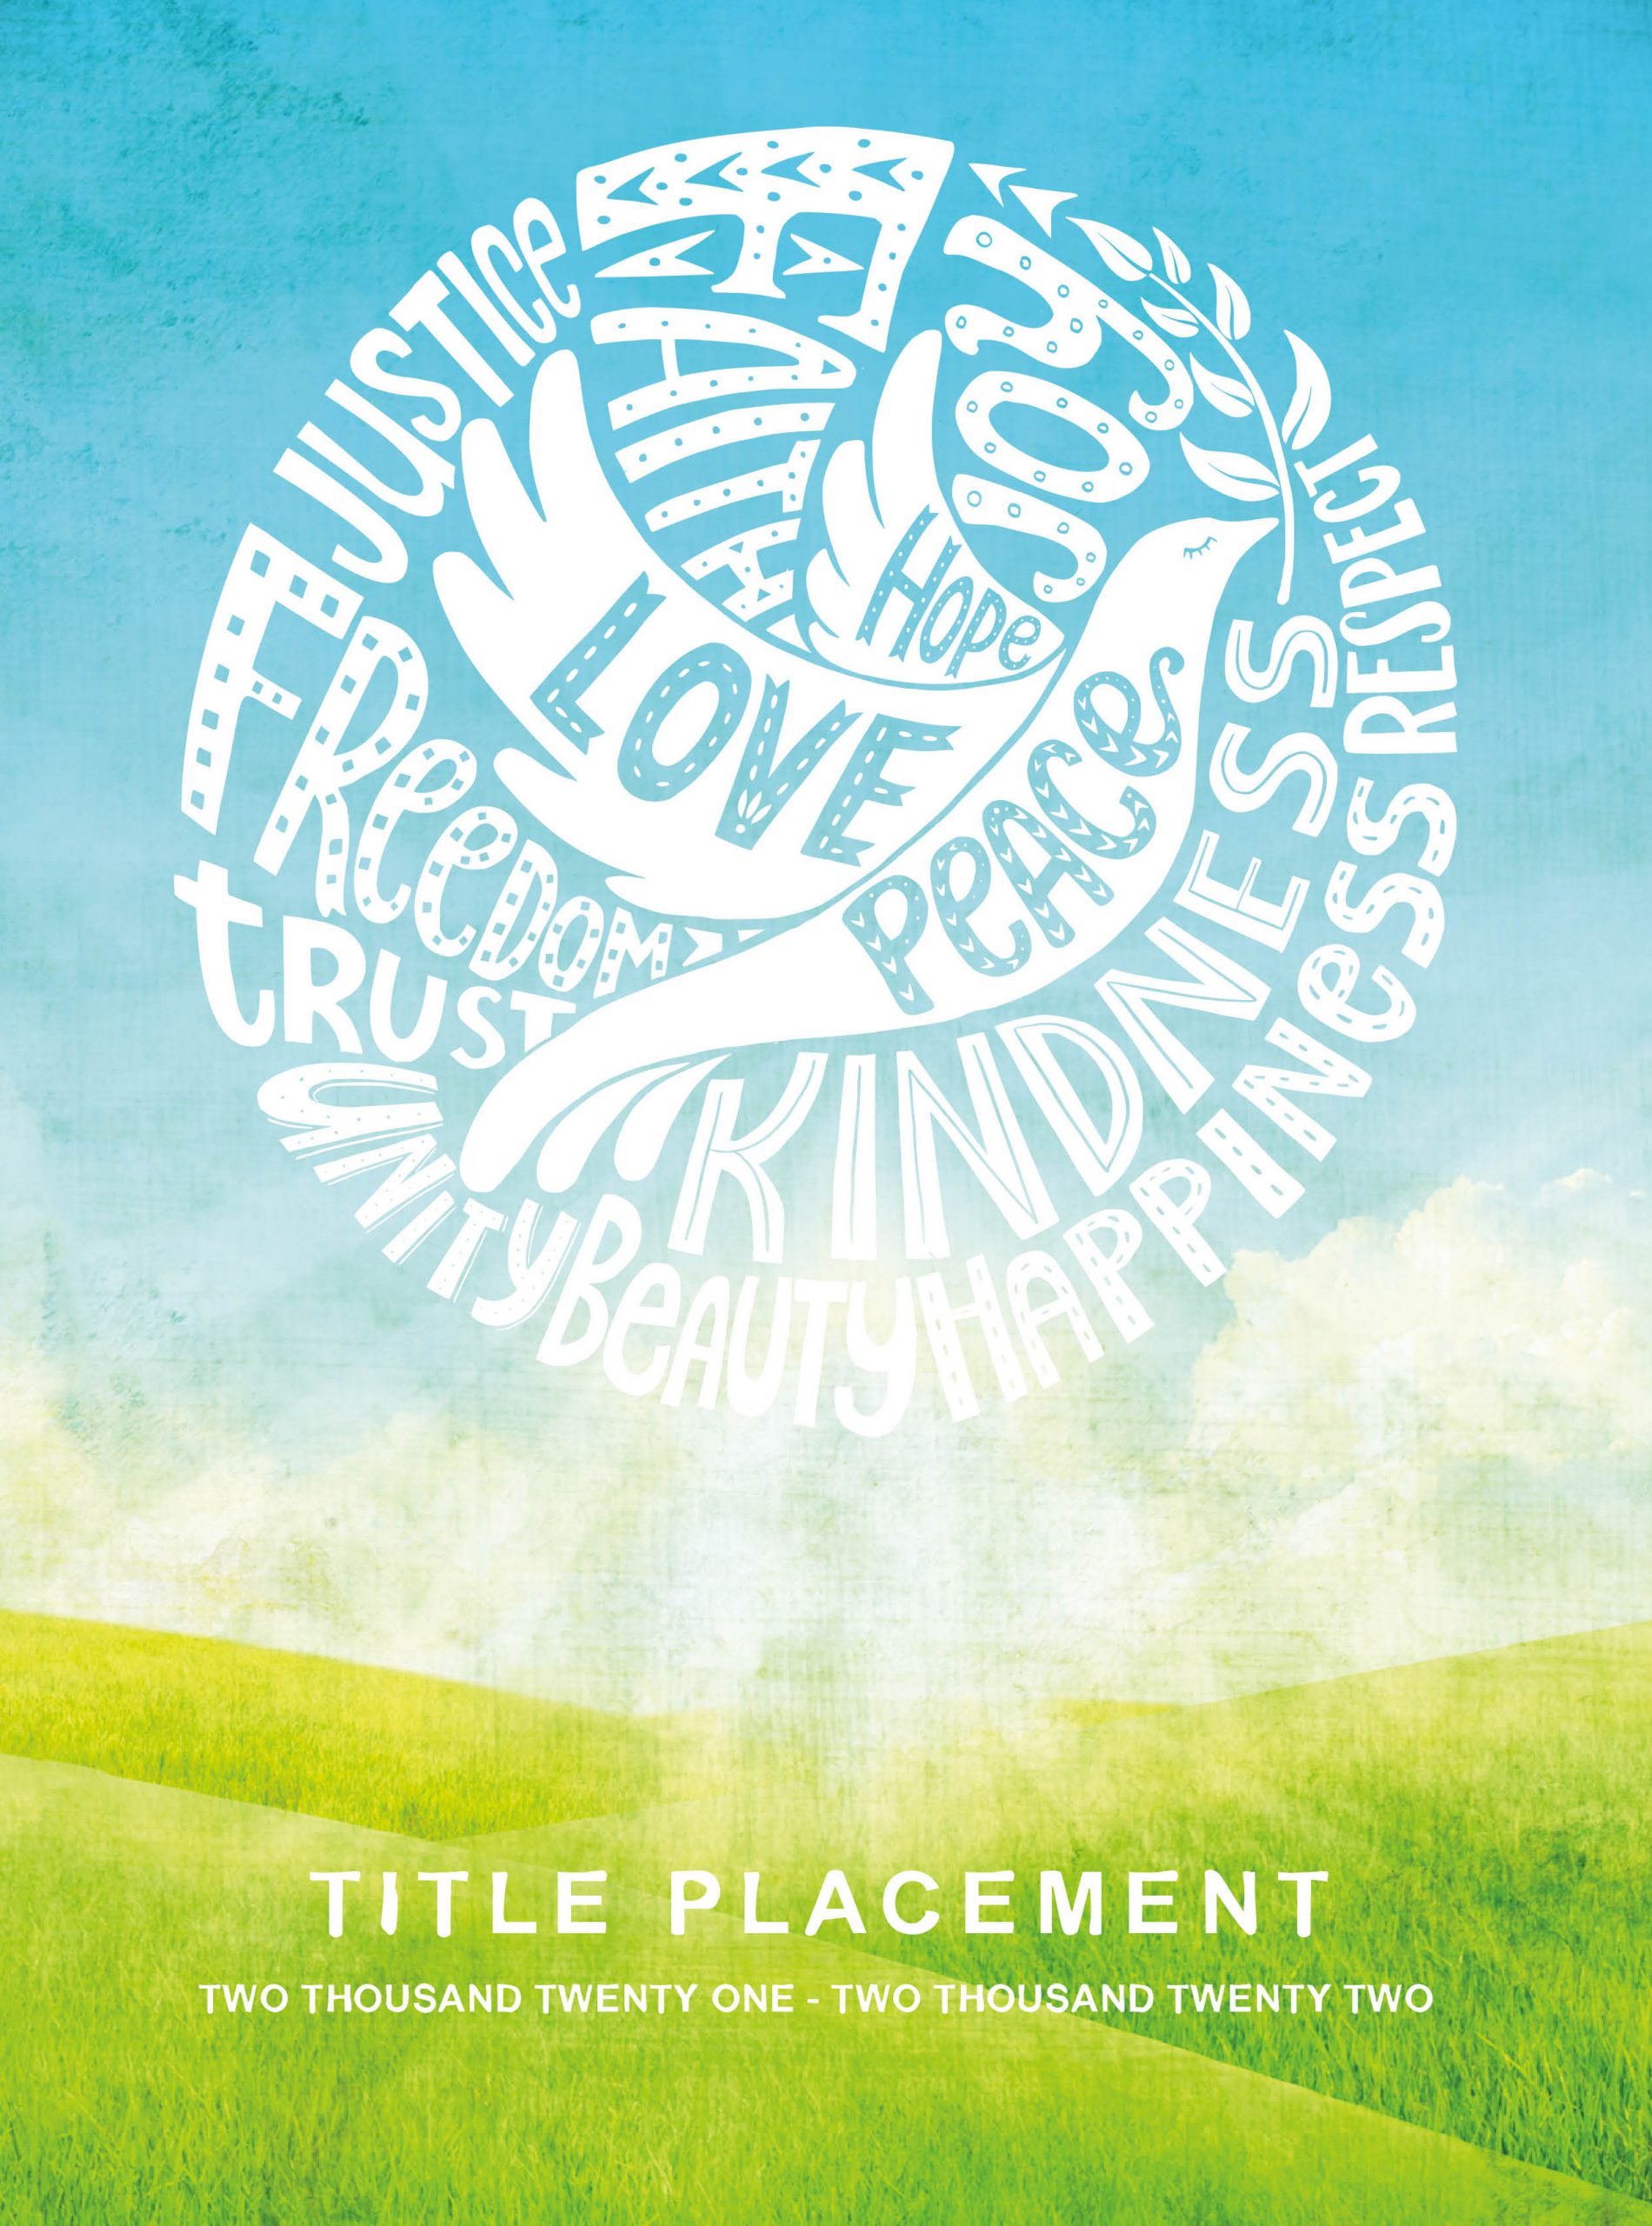 Yellow and Dark Teal Background With Design Letters, Yearbook Cover 2008